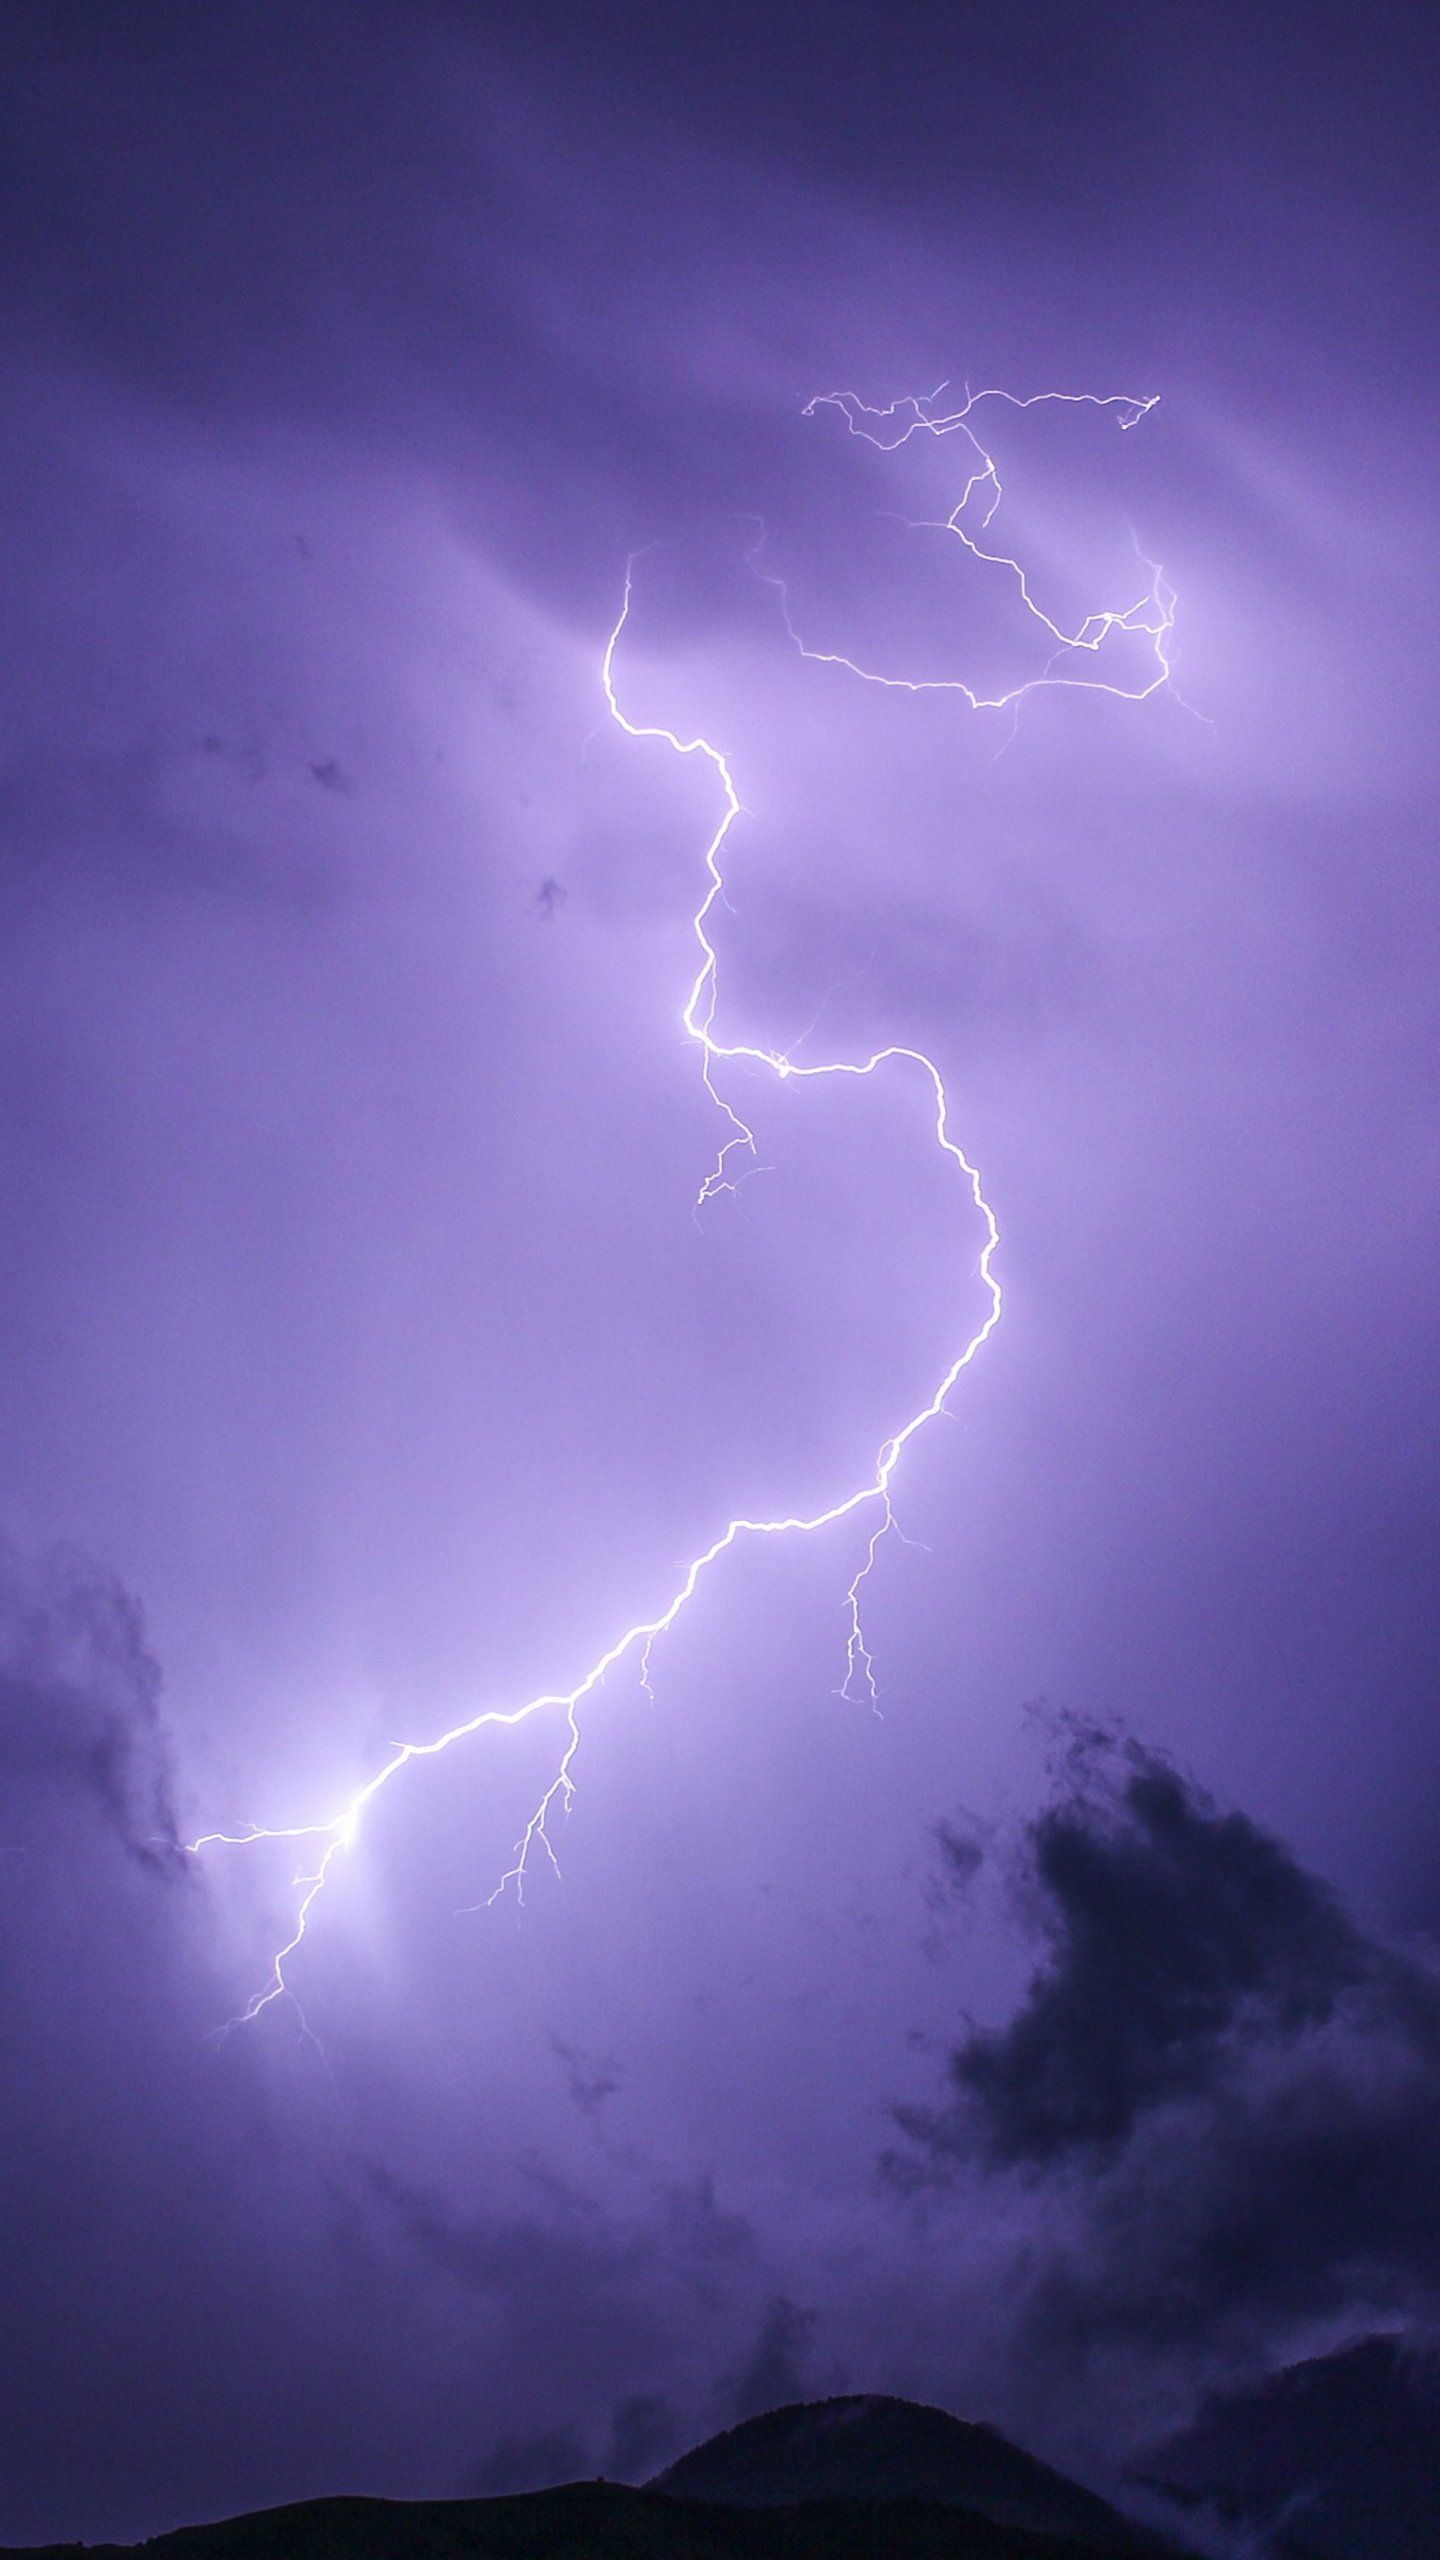 A bolt of lightning strikes during a storm in the sky - Lightning